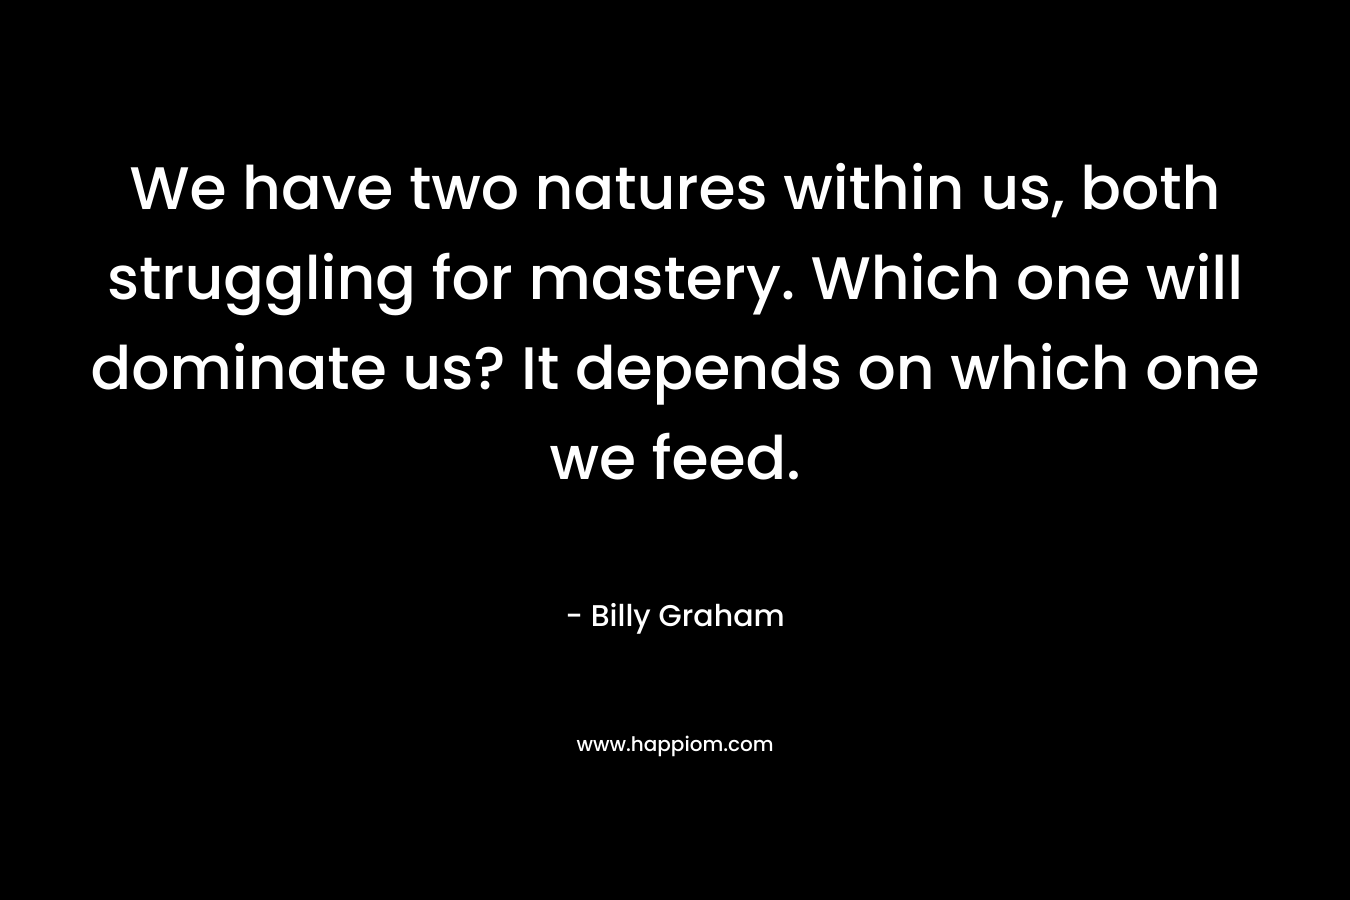 We have two natures within us, both struggling for mastery. Which one will dominate us? It depends on which one we feed. – Billy Graham